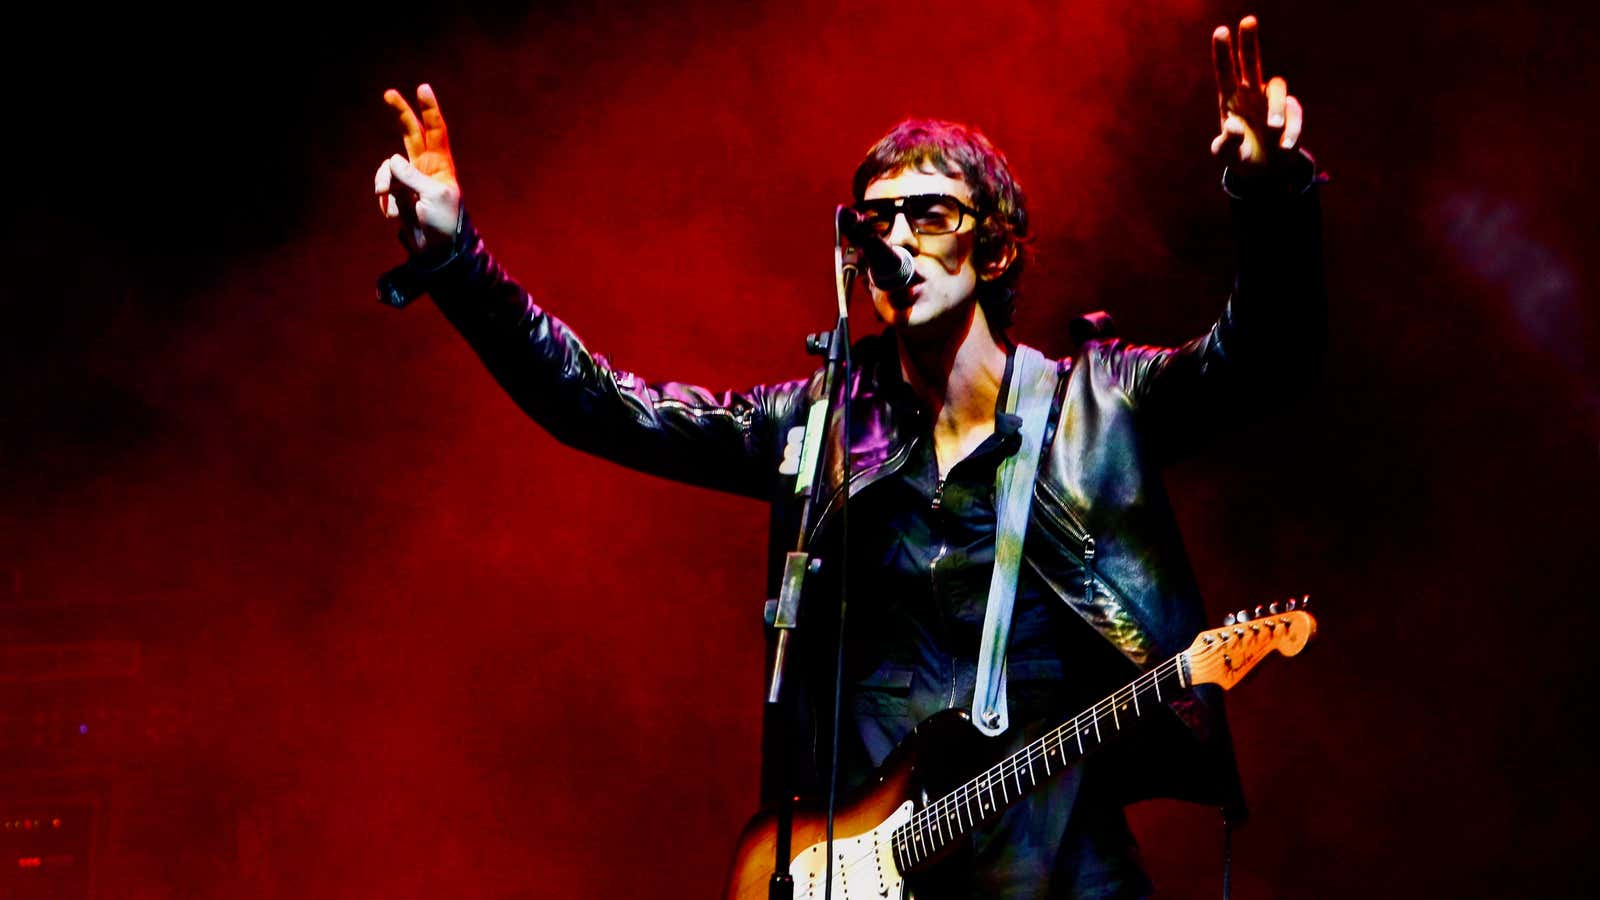 Richard Ashcroft of the Verve gets what he needs.